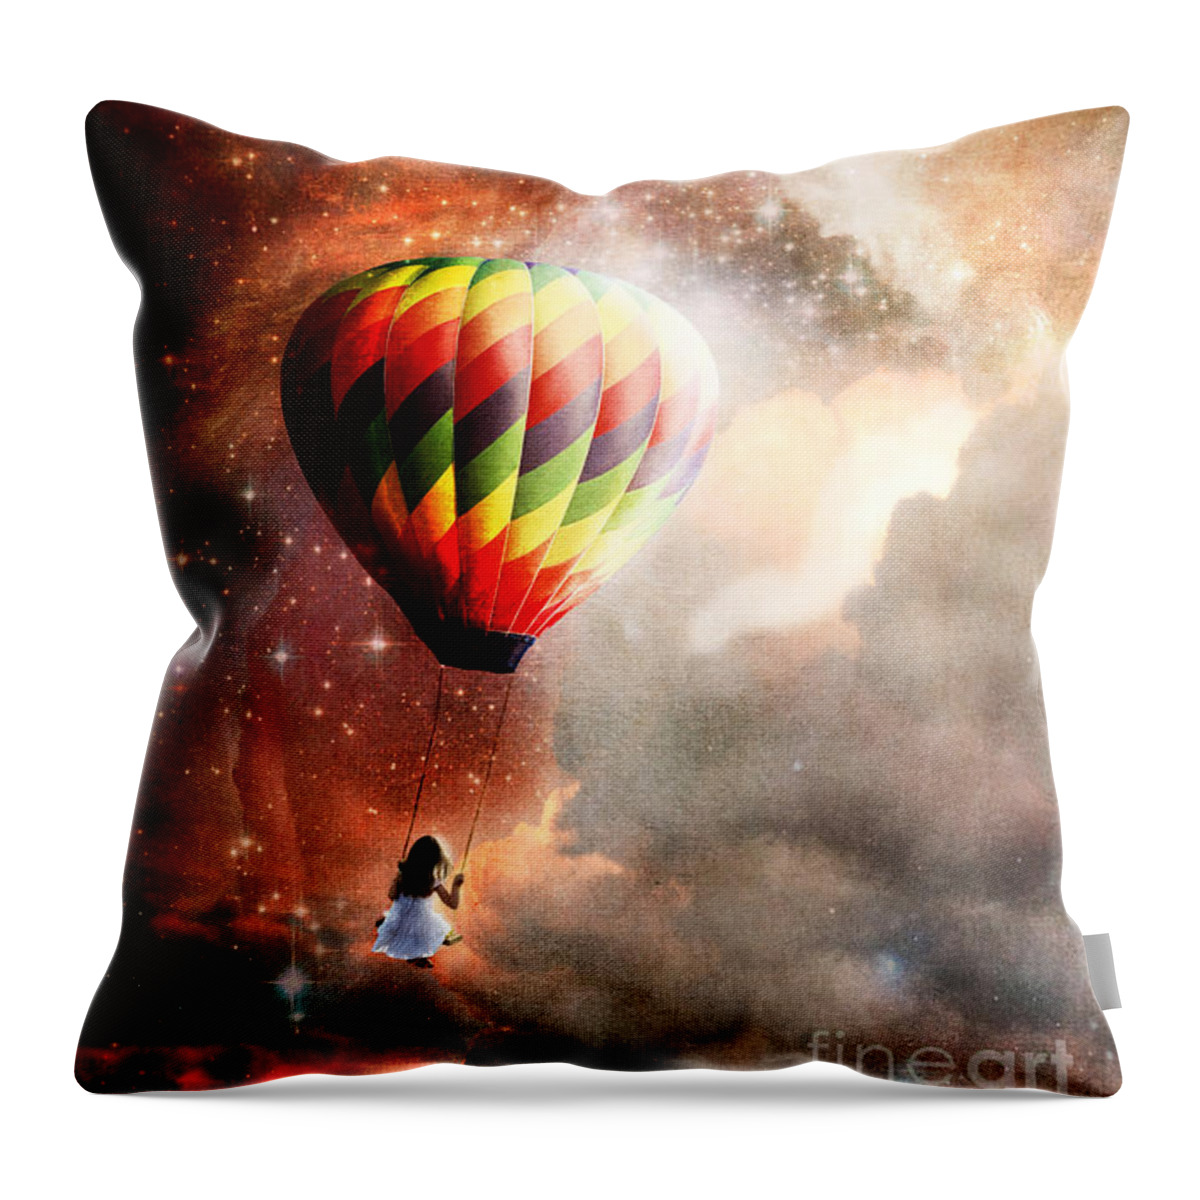 Cosmic Throw Pillow featuring the photograph A Starry Ride by Stephanie Frey